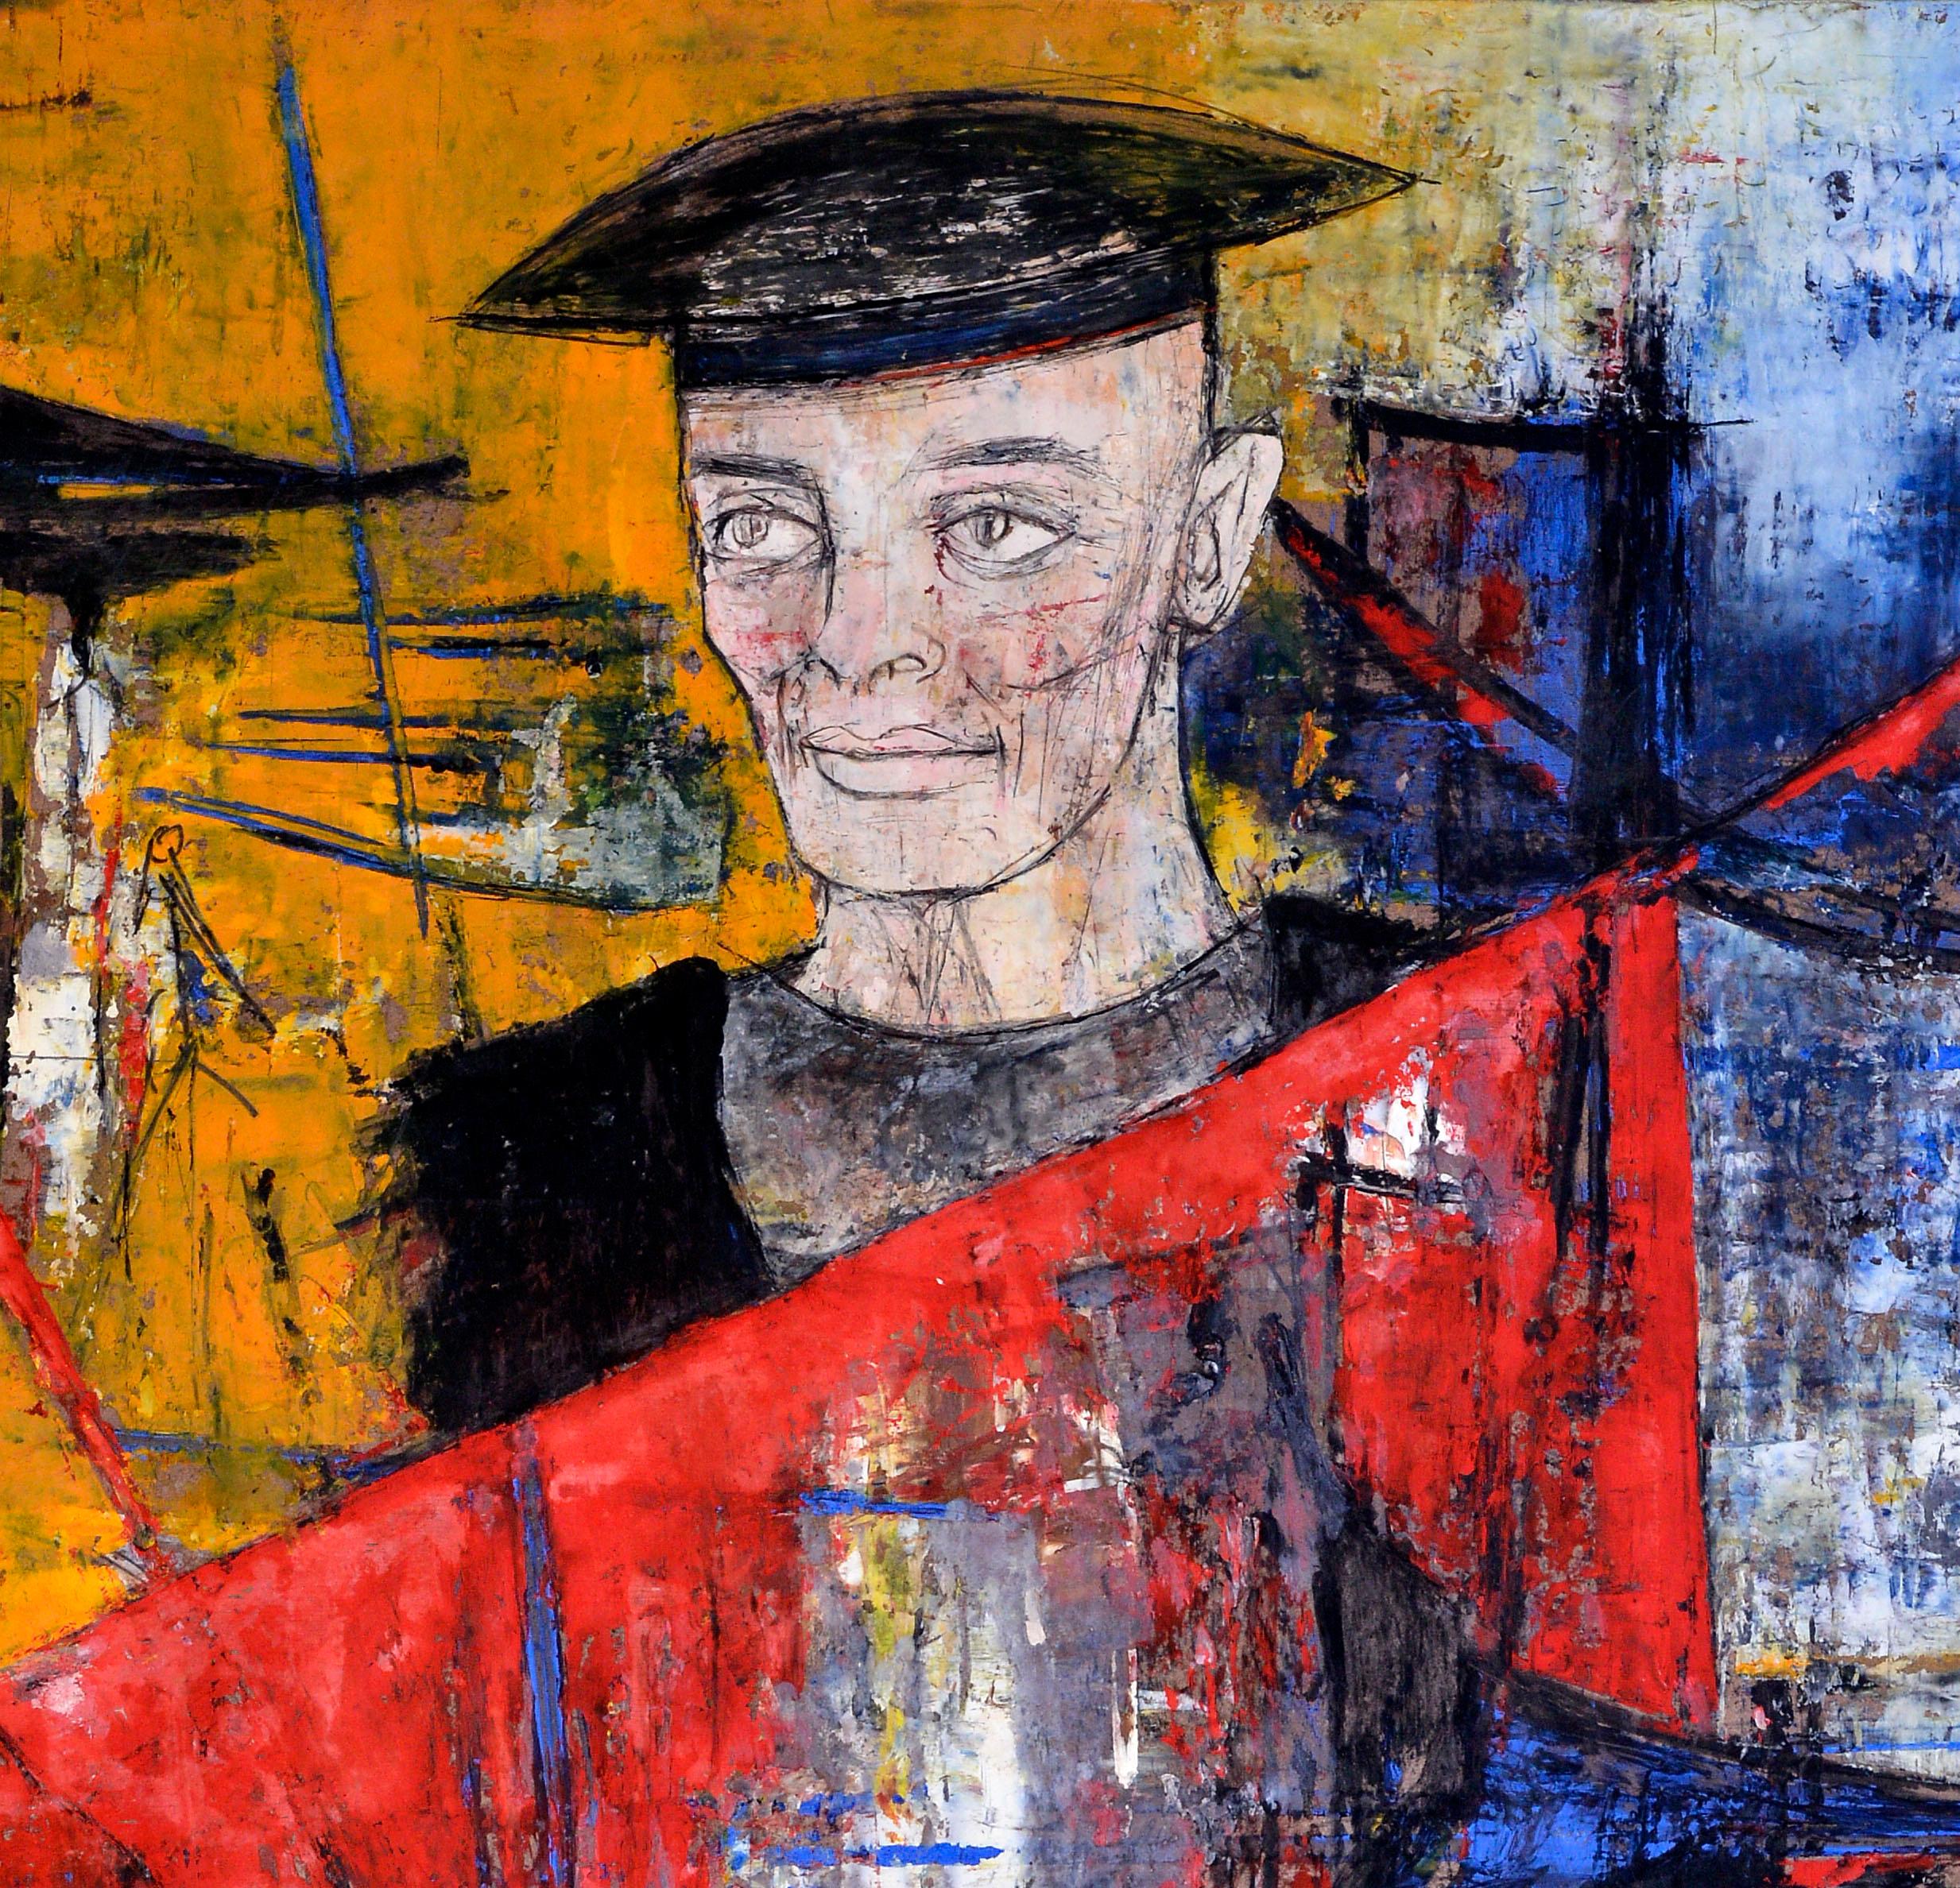 Man with a Hat on a Yellow & Blue background with a Red Flag floating - Painting by Jean Sanglar